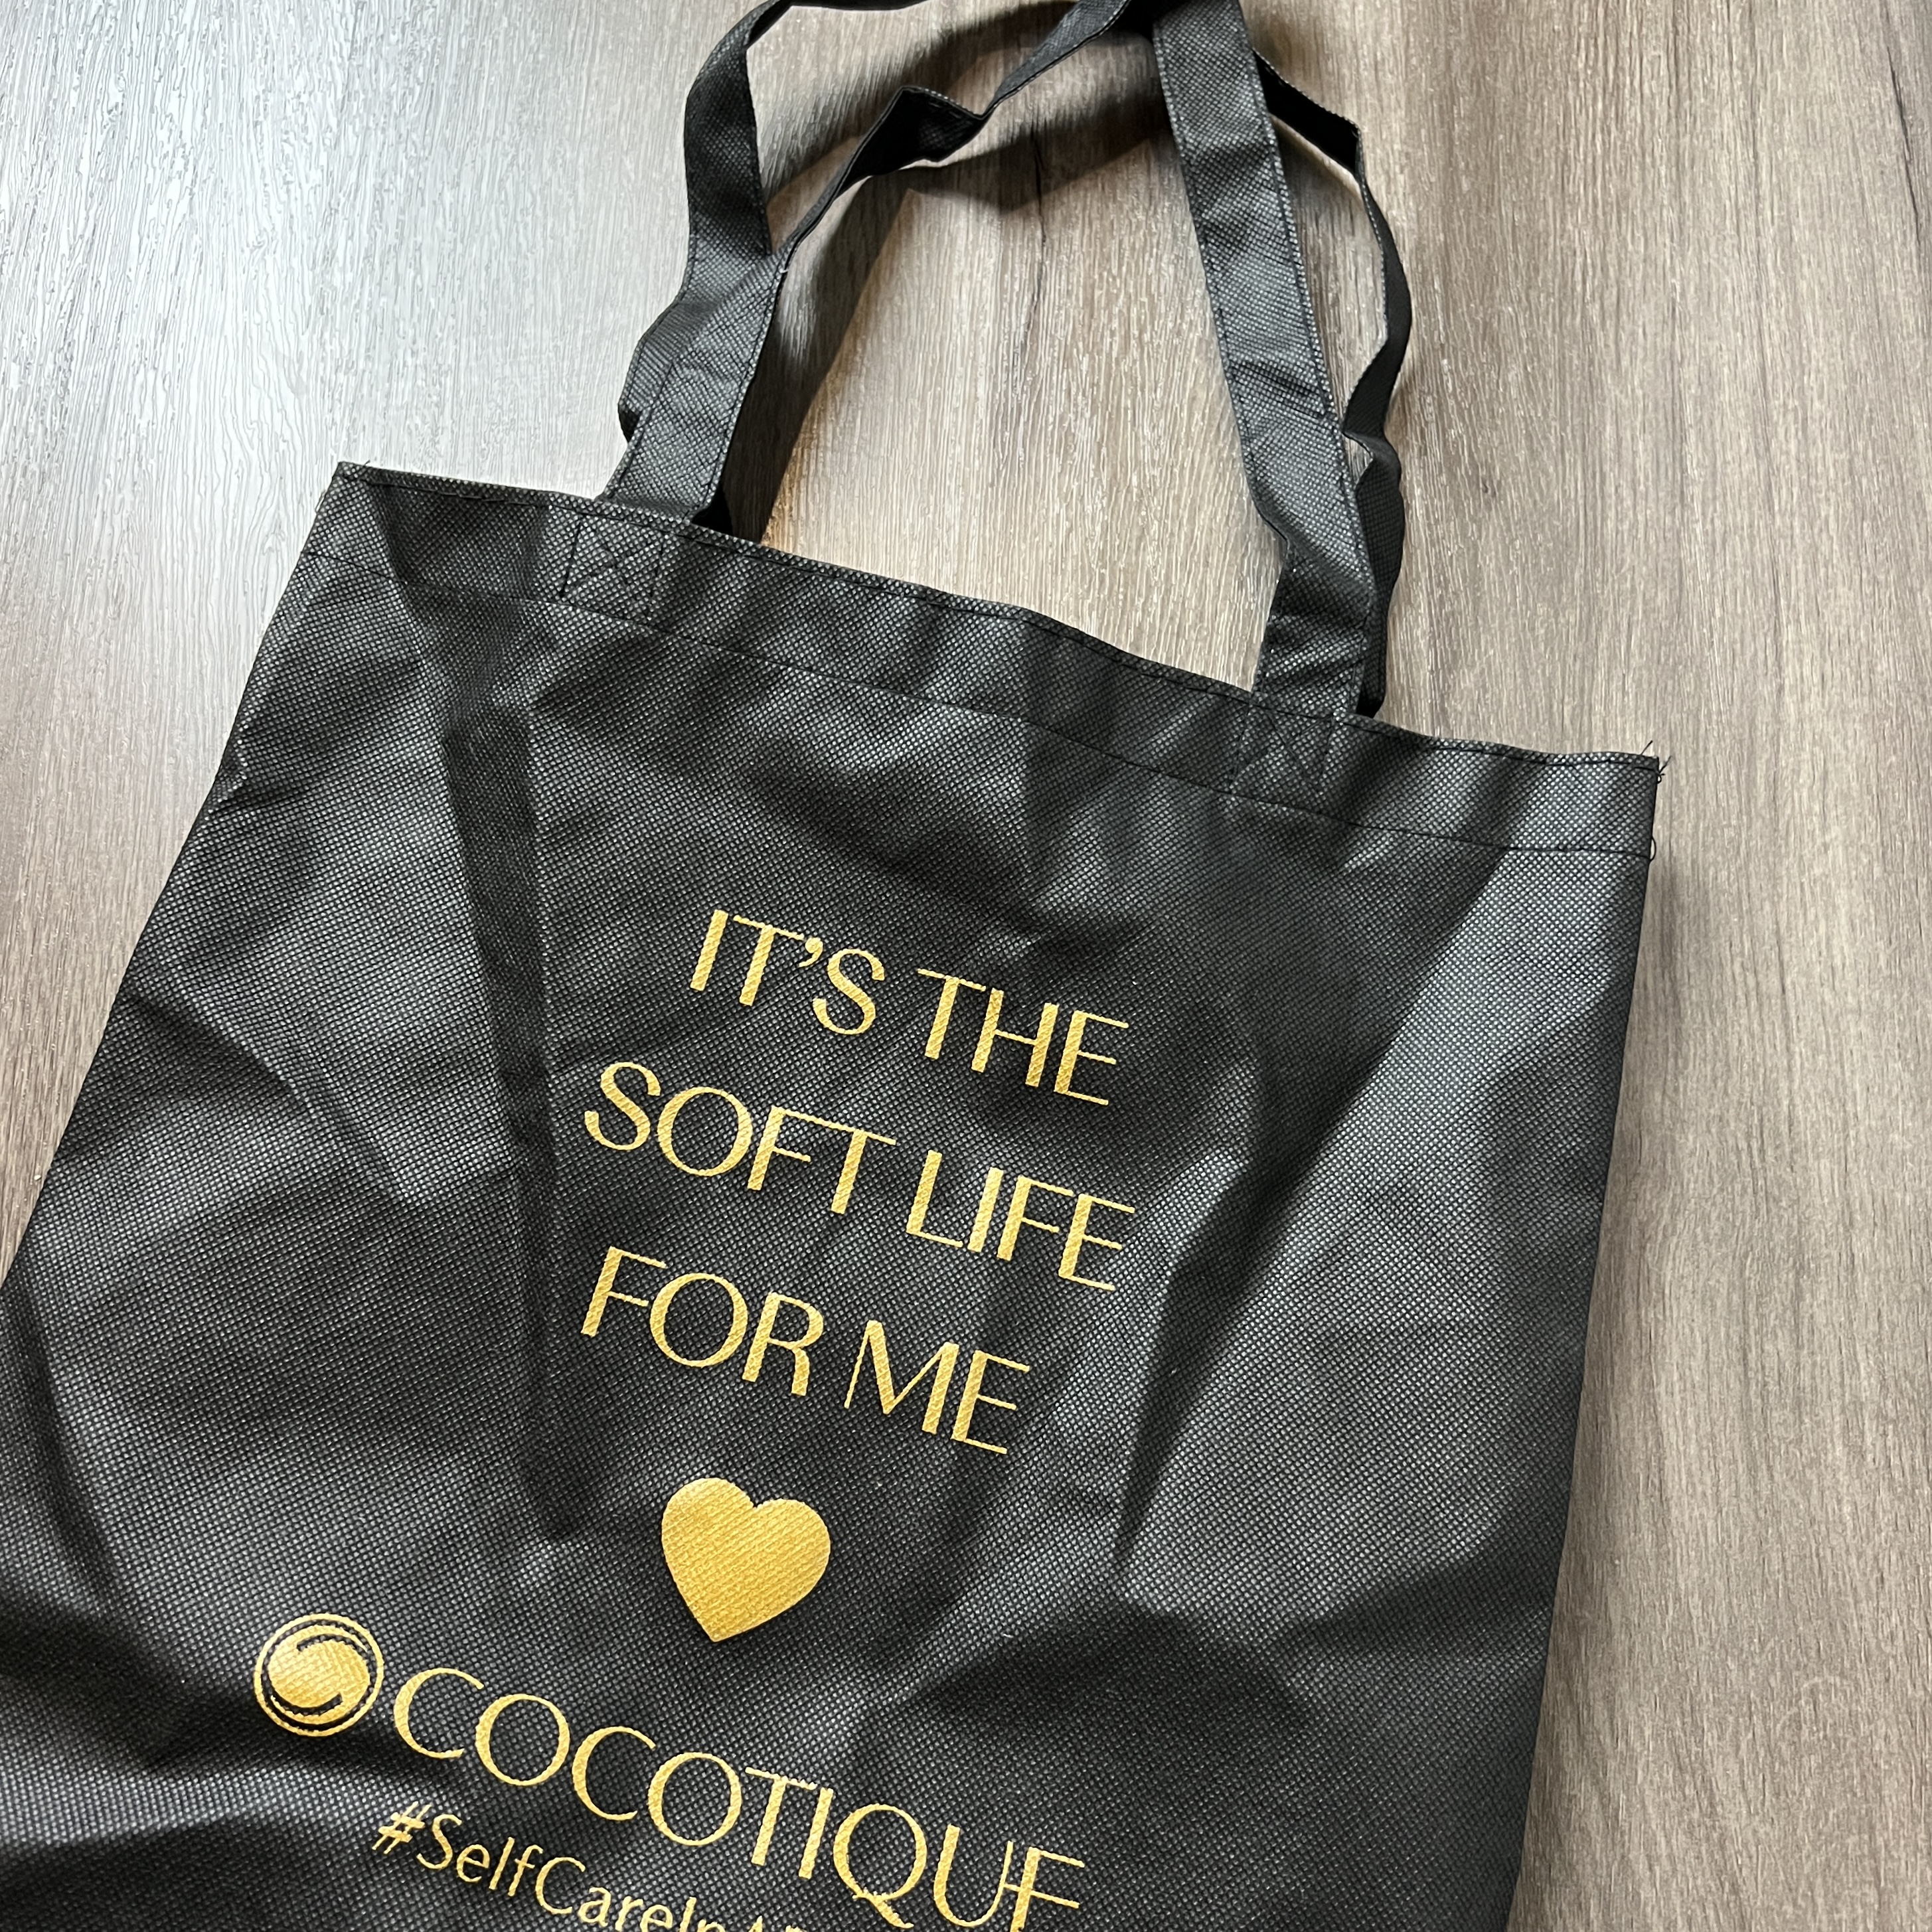  COCOTIQUE - Beauty & Self-Care Subscription Box for Skincare,  Body Care, and Curly/Textured Hair Care : Everything Else